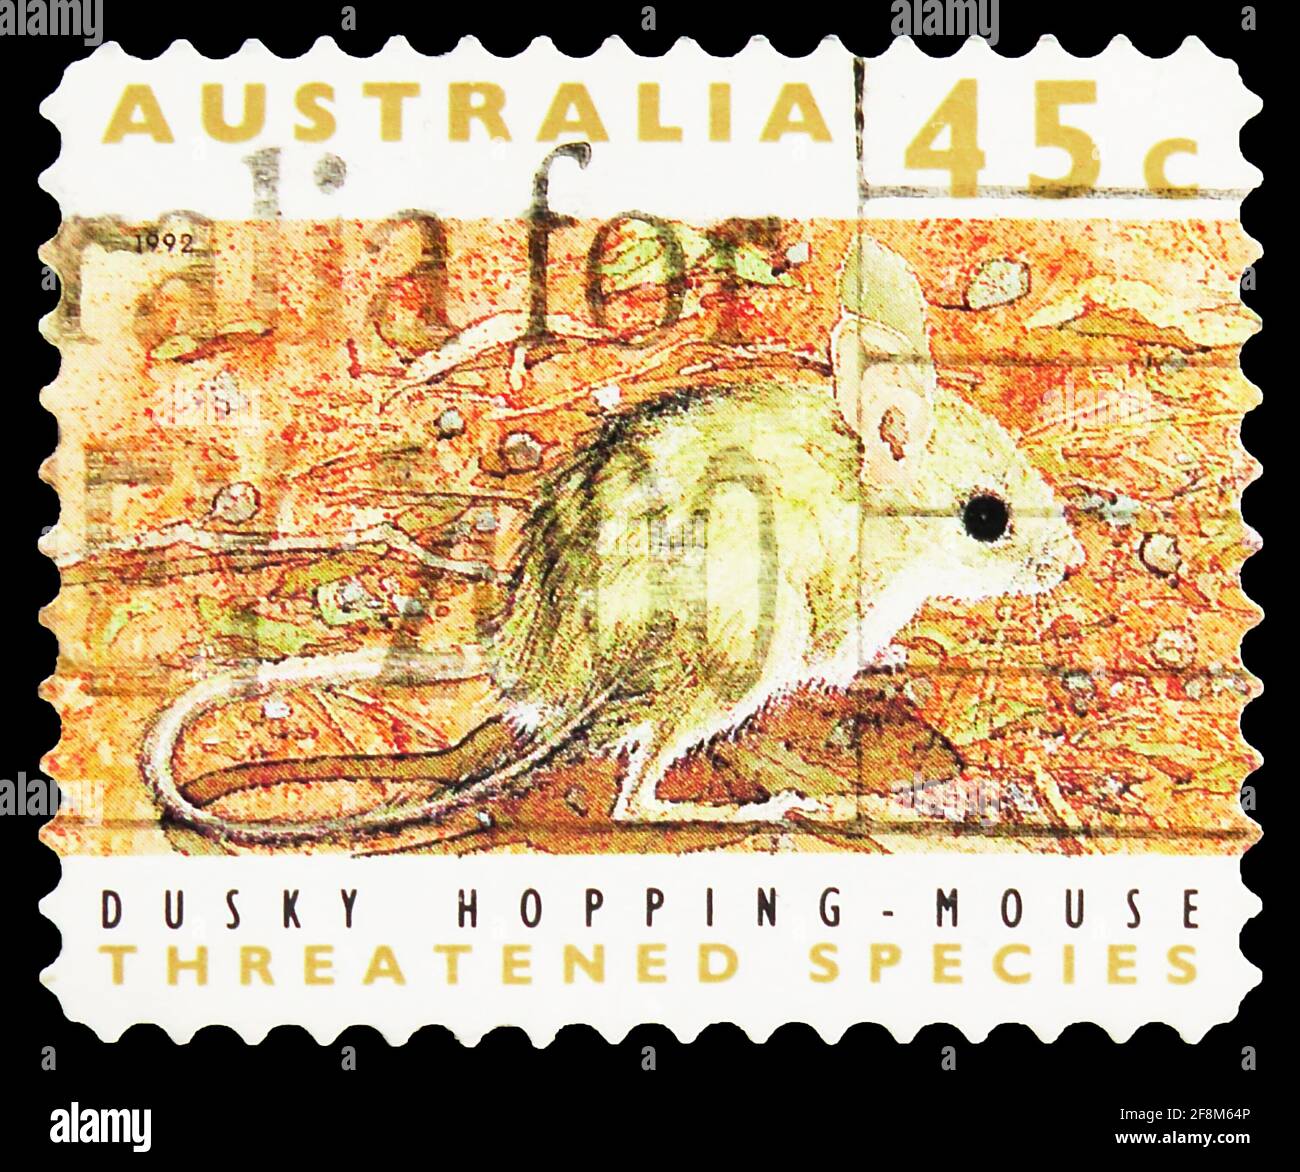 MOSCOW, RUSSIA - SEPTEMBER 30, 2019: Postage stamp printed in Australia shows Fawn Hopping Mouse (Notomys cervinus), Threatened Species serie, circa 1 Stock Photo